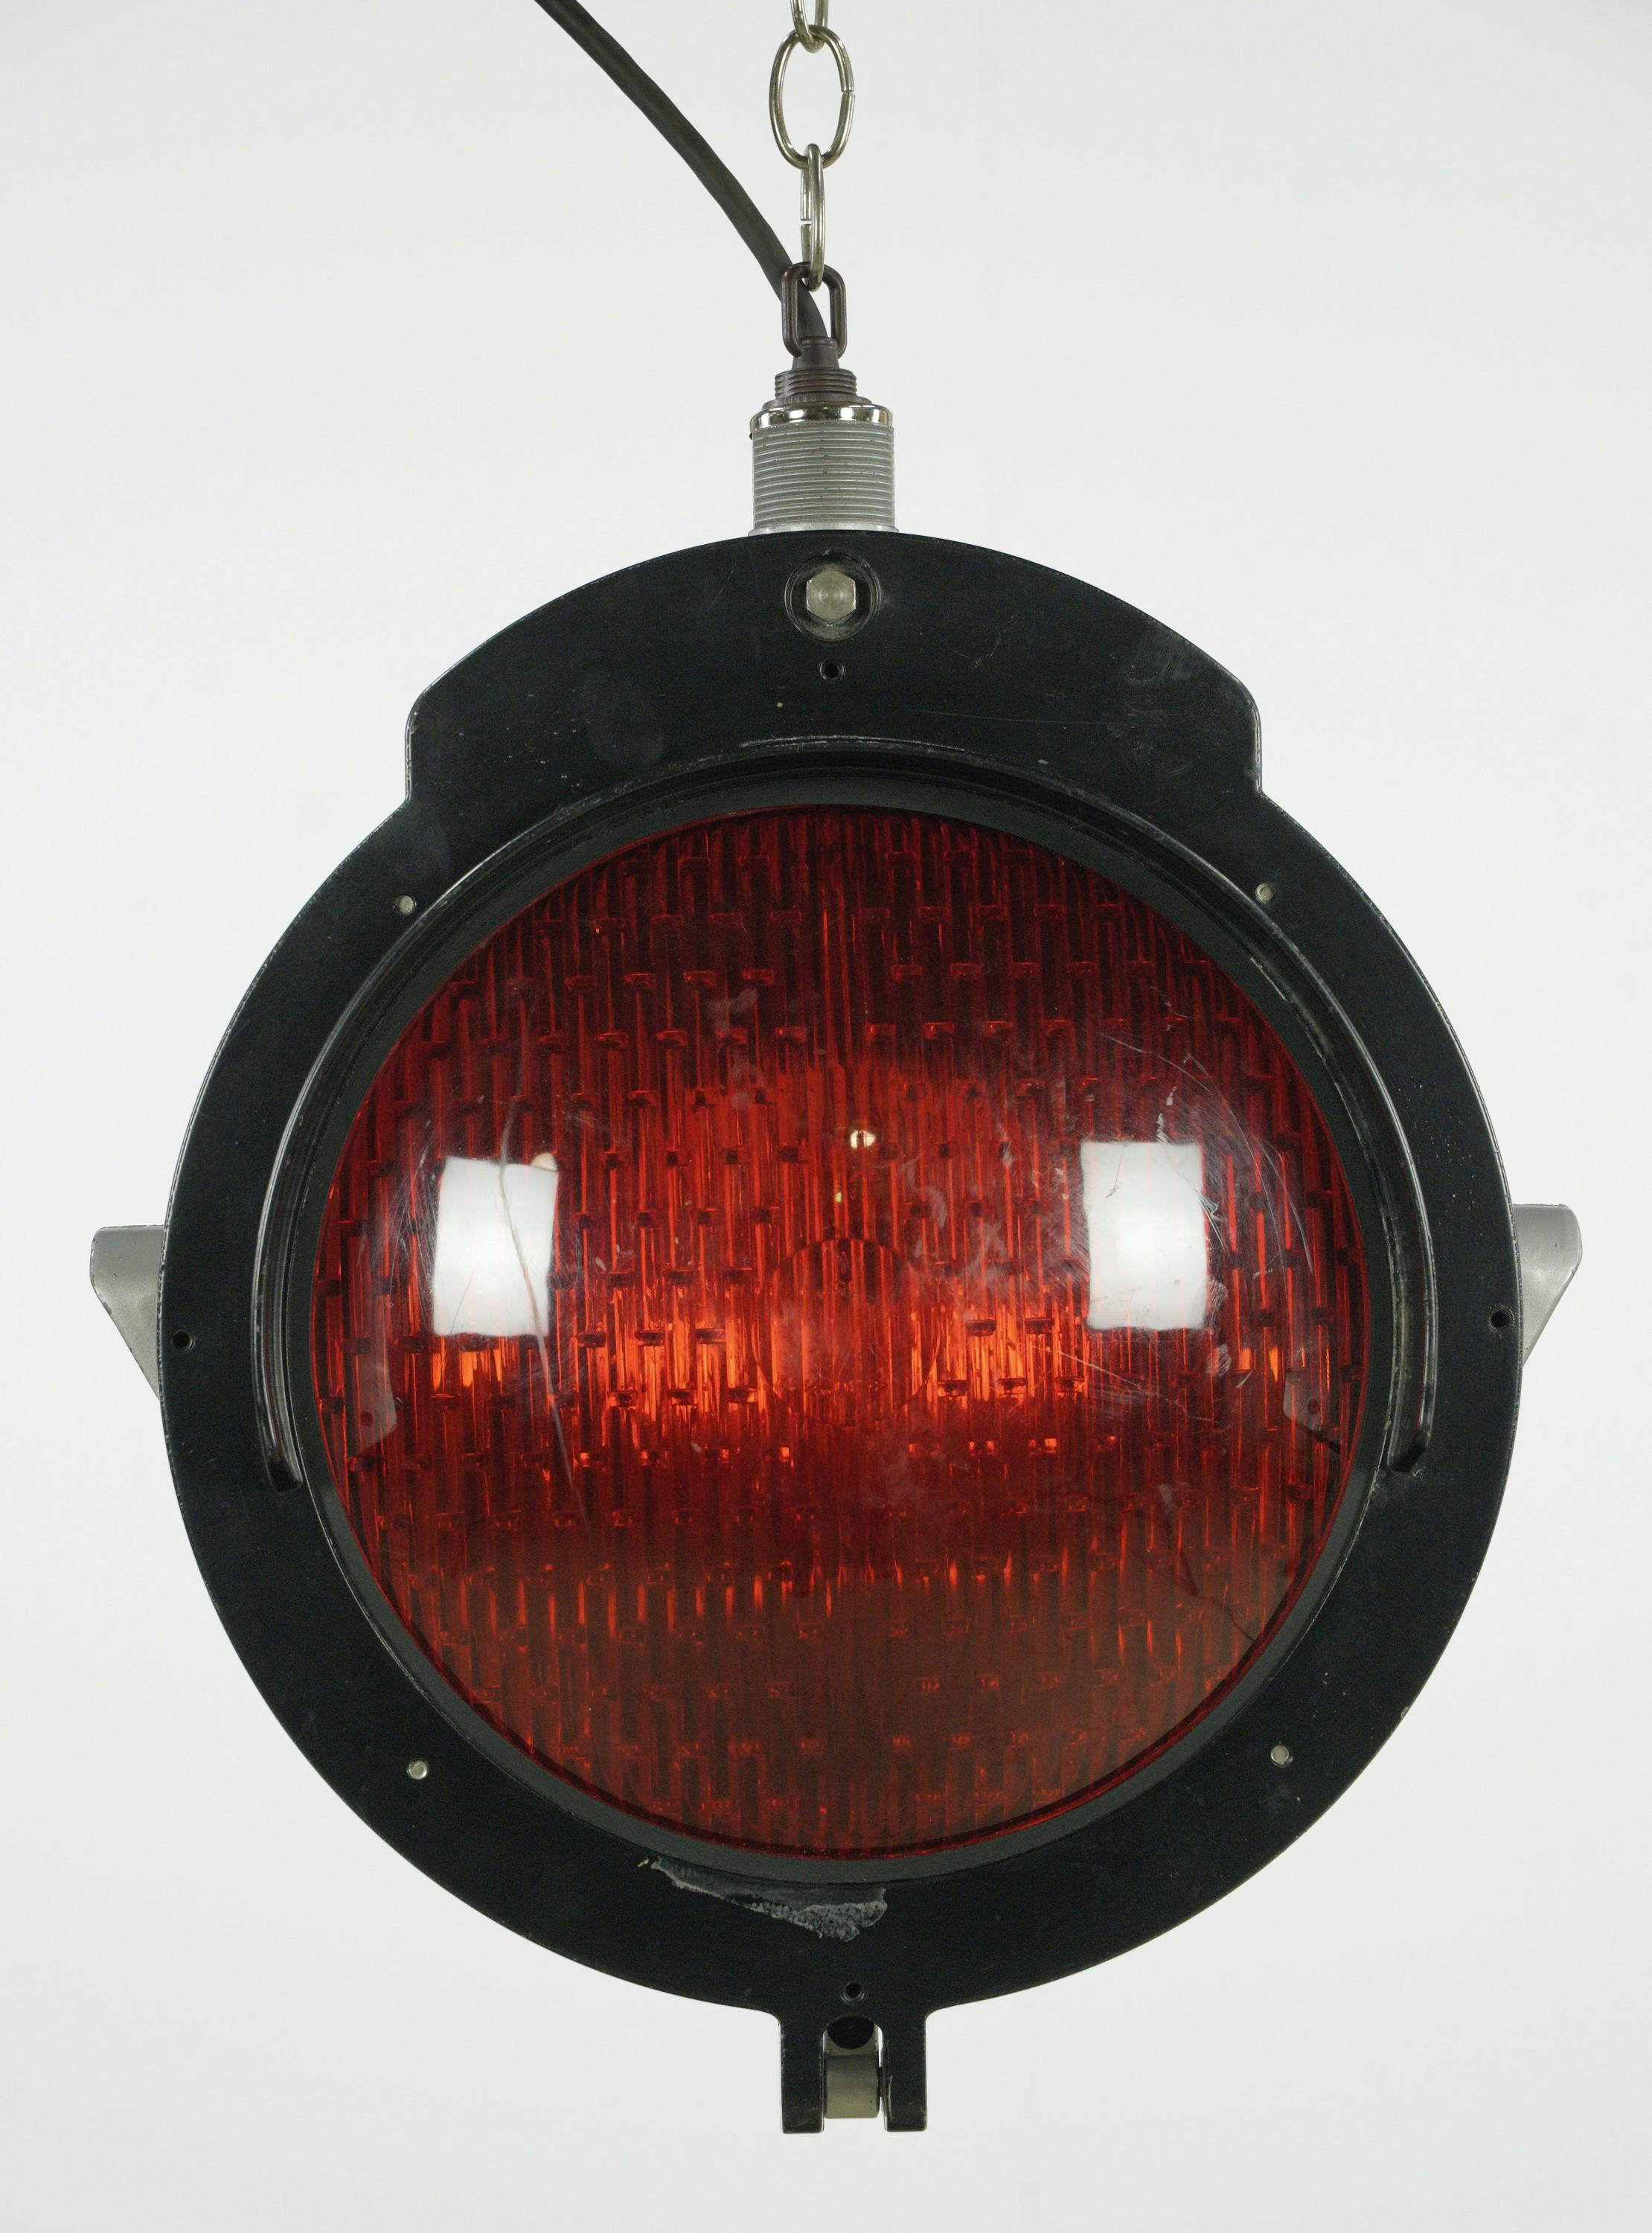 Black aluminum rail yard railroad pendant light with red glass. Made by Safetran Systems Corp. Ceiling canopy available. Good condition with appropriate wear from age. Cleaned and restored. Small quantity available at time of posting. Please